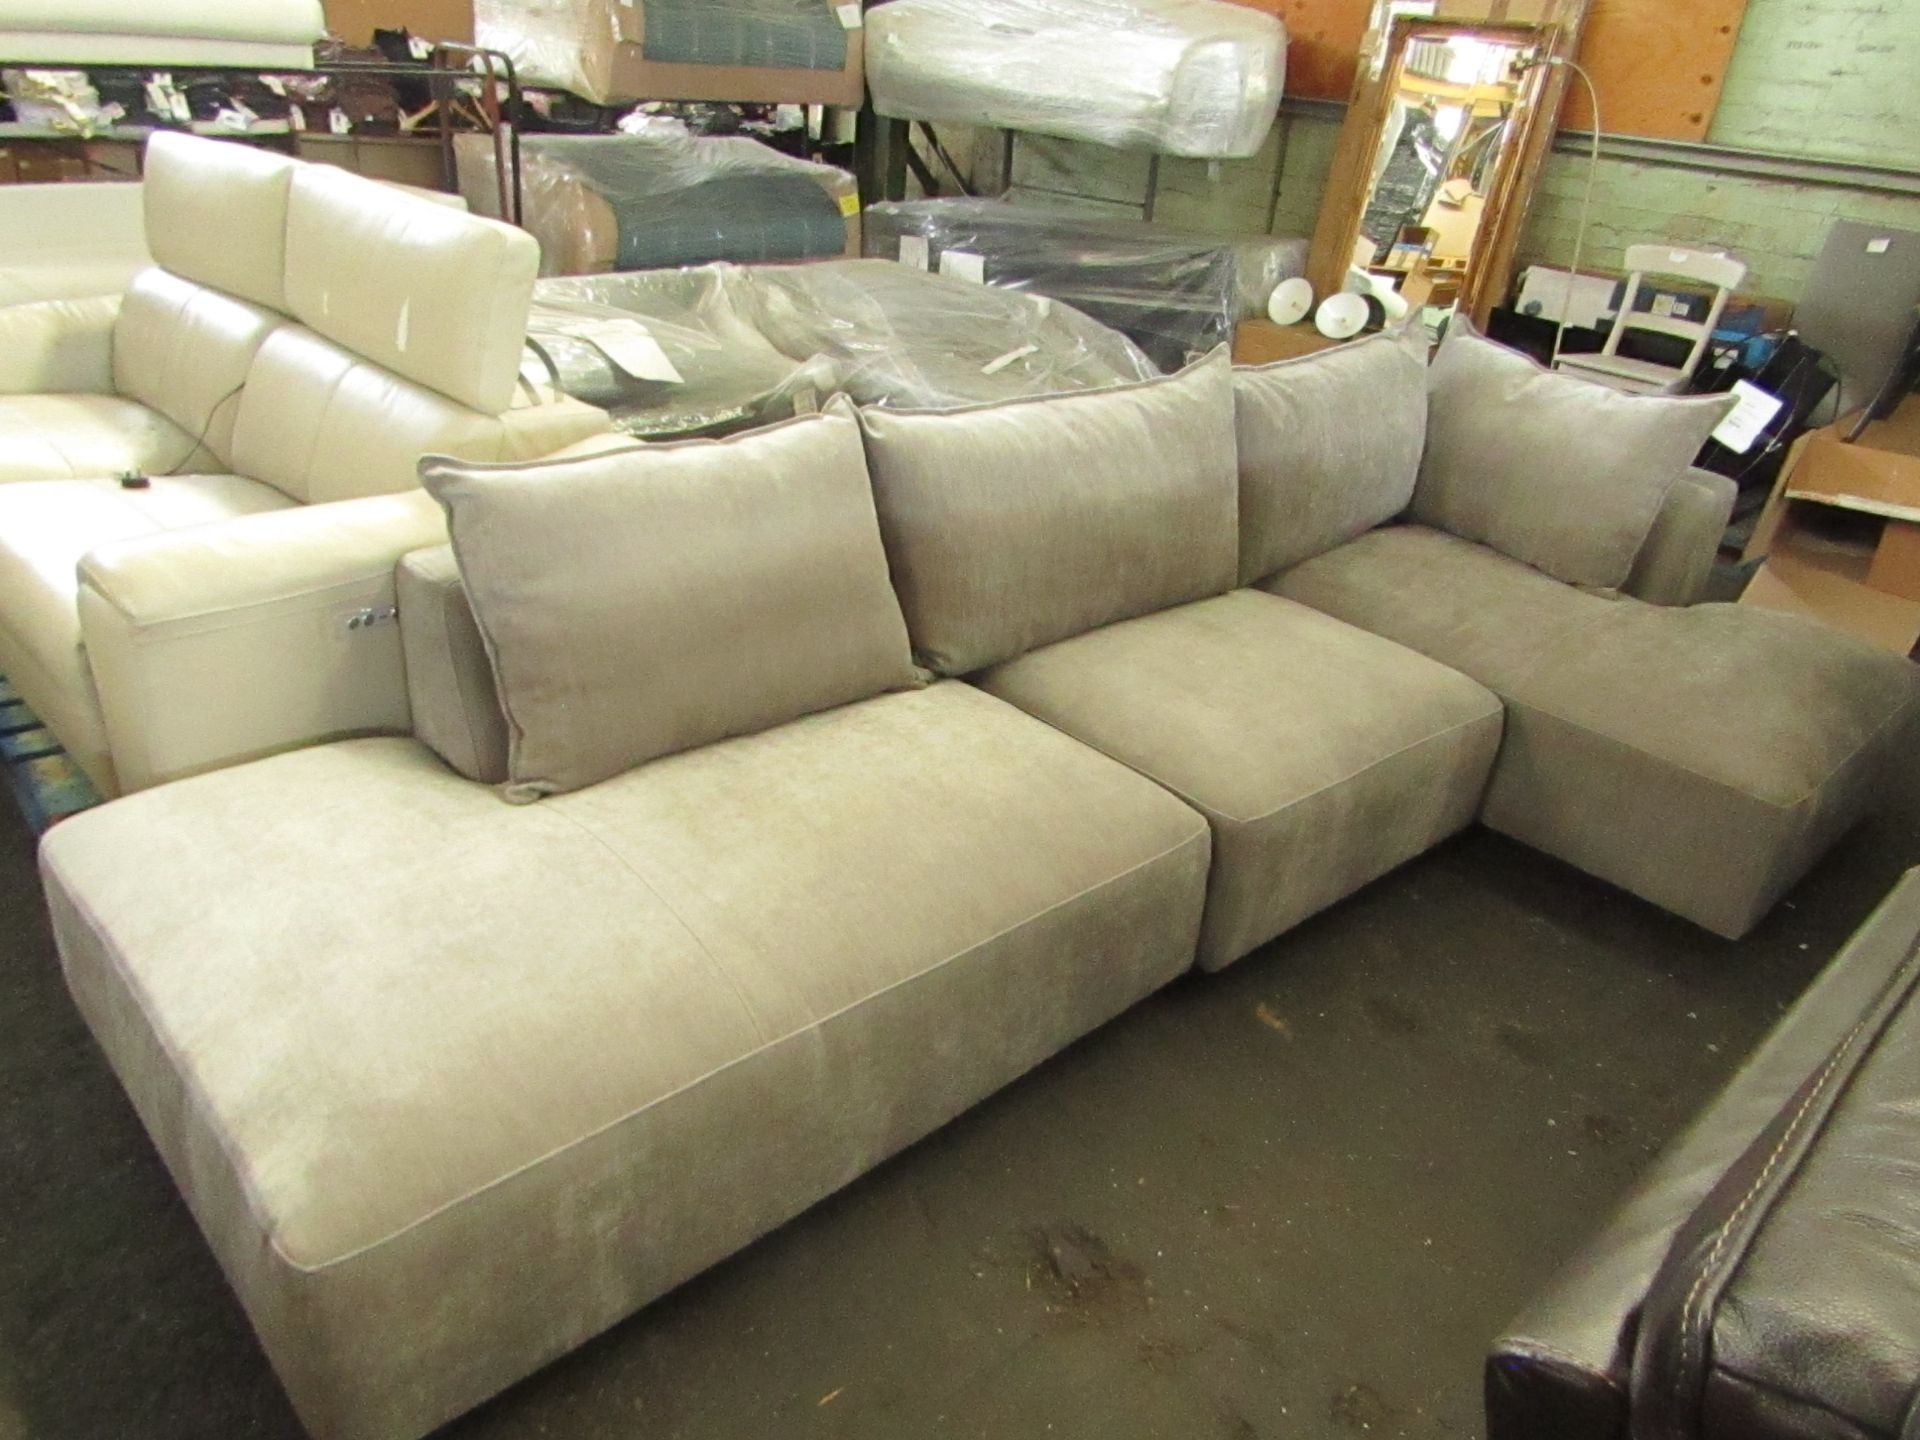 3 piece Sectional grey Costco Sofa in very good condition